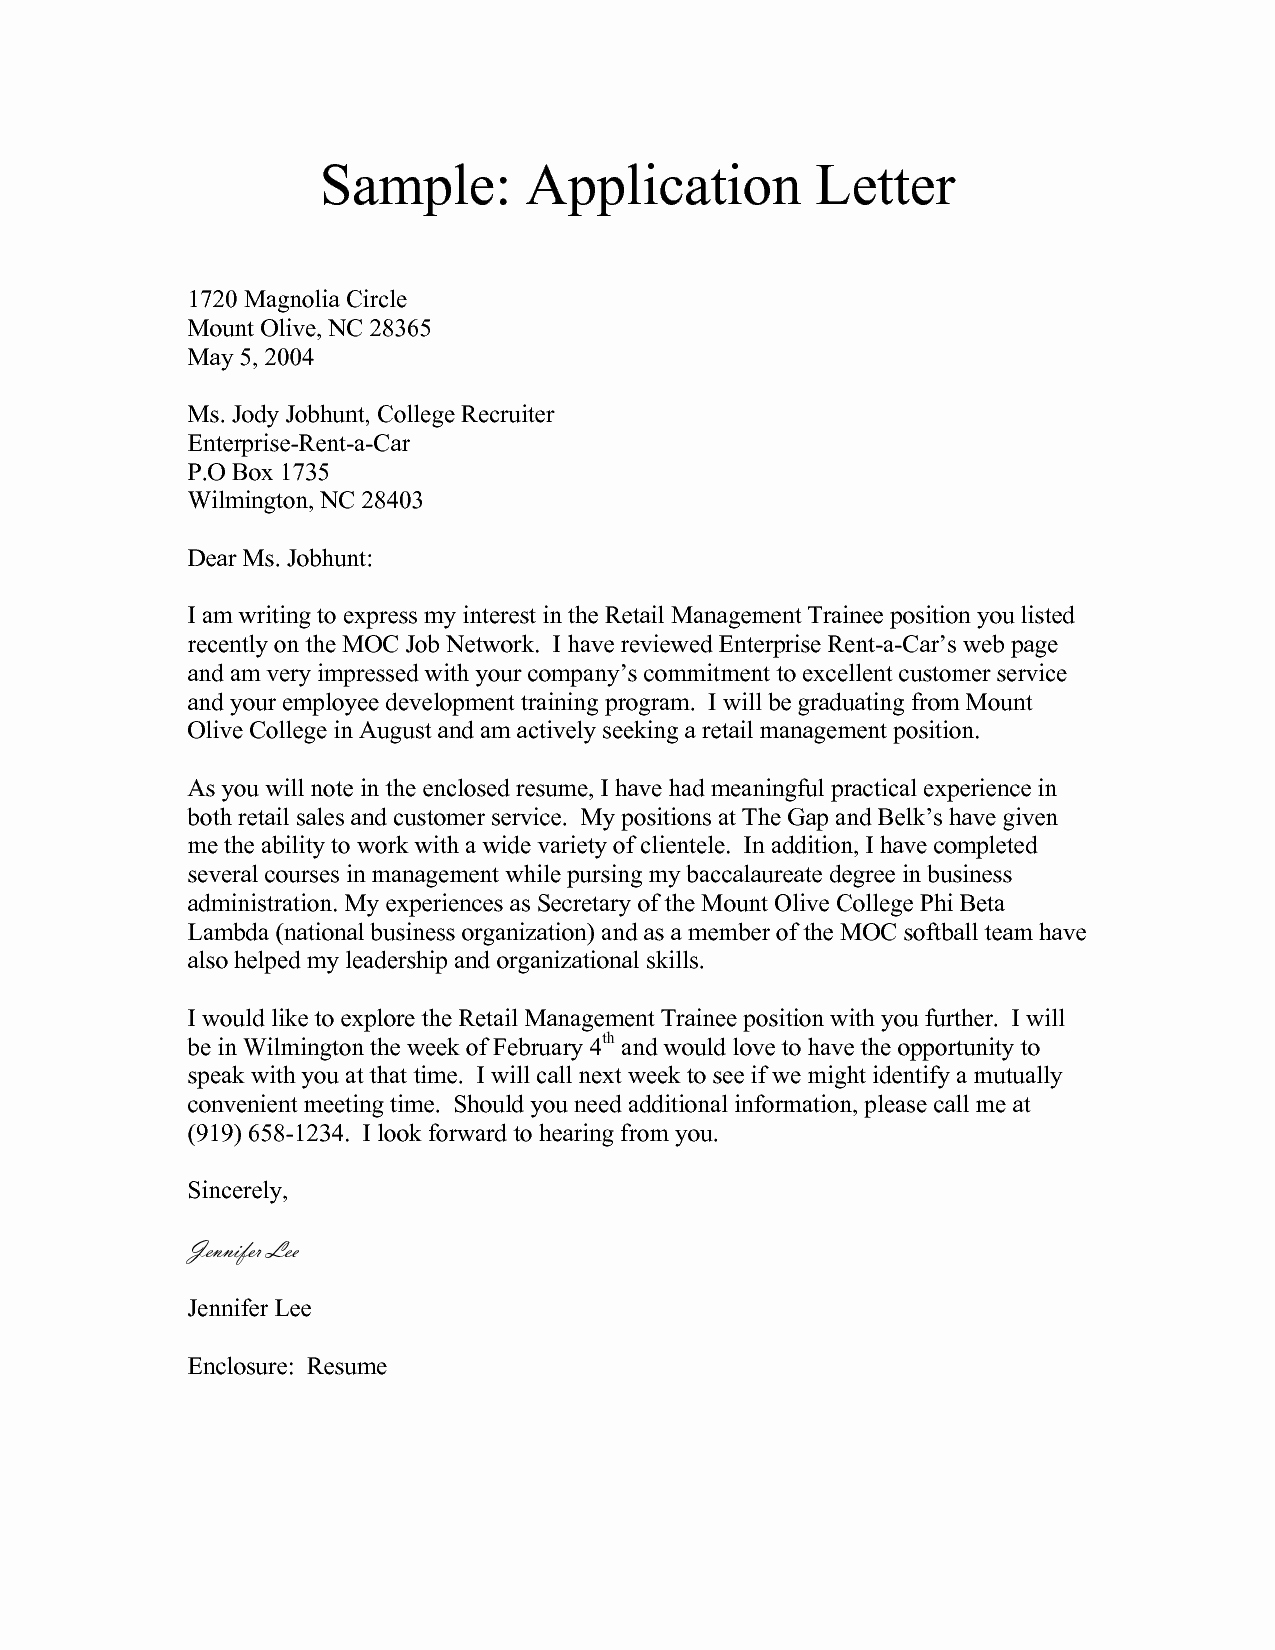 Letters Of Application Examples Beautiful Application Letters Download Pdf format